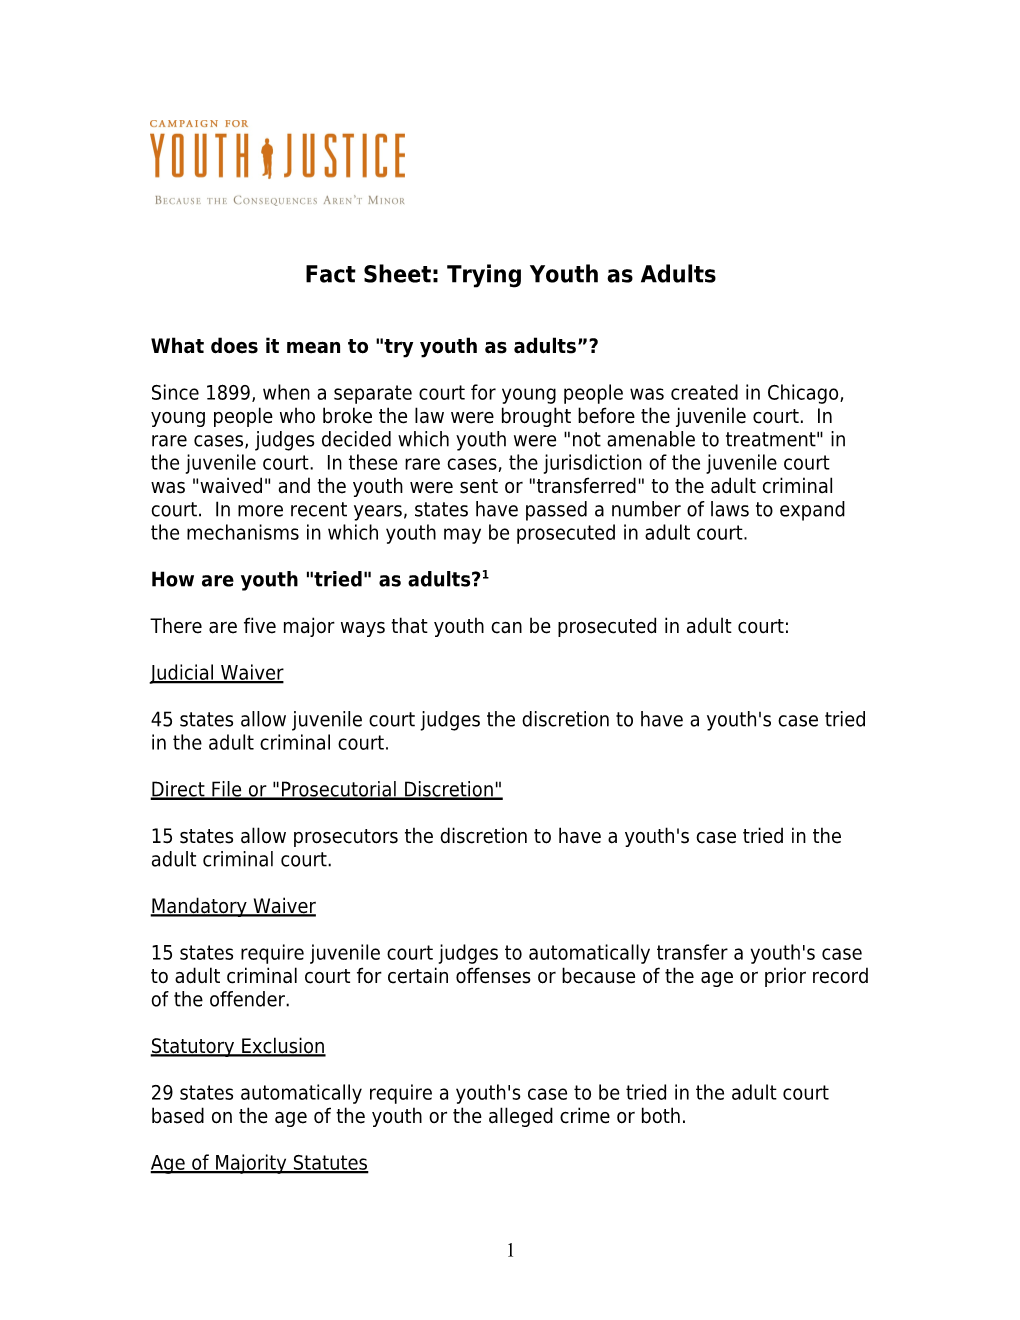 Fact Sheet: Trying Youth As Adults